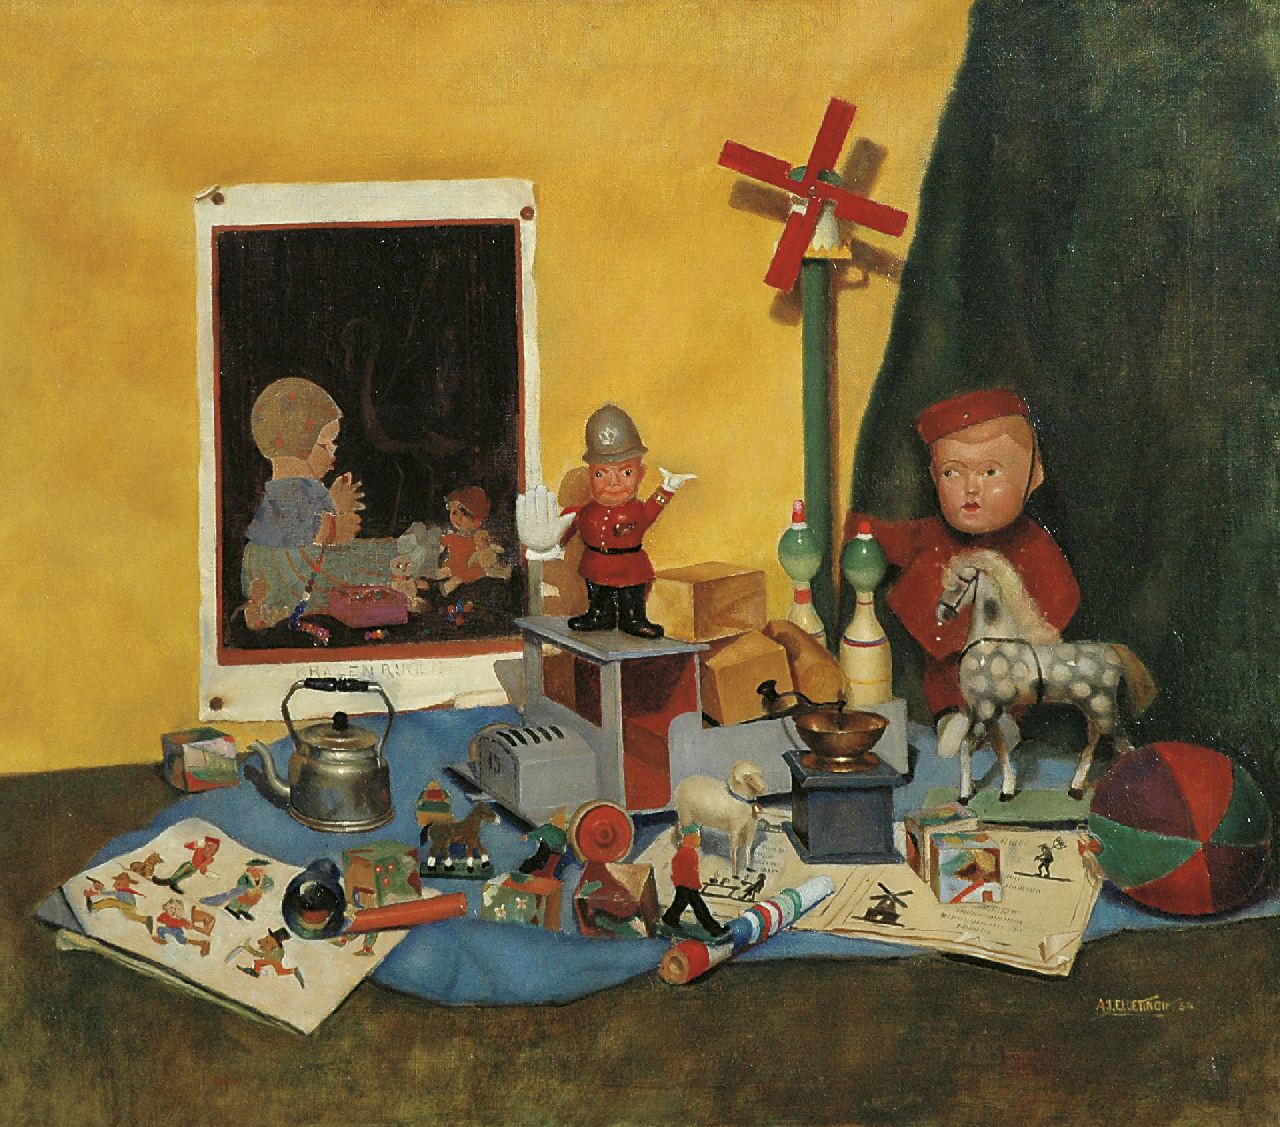 A.J. Cloetingh | Children's toys, oil on canvas, 70.3 x 80.3 cm, signed l.r. and dated '30